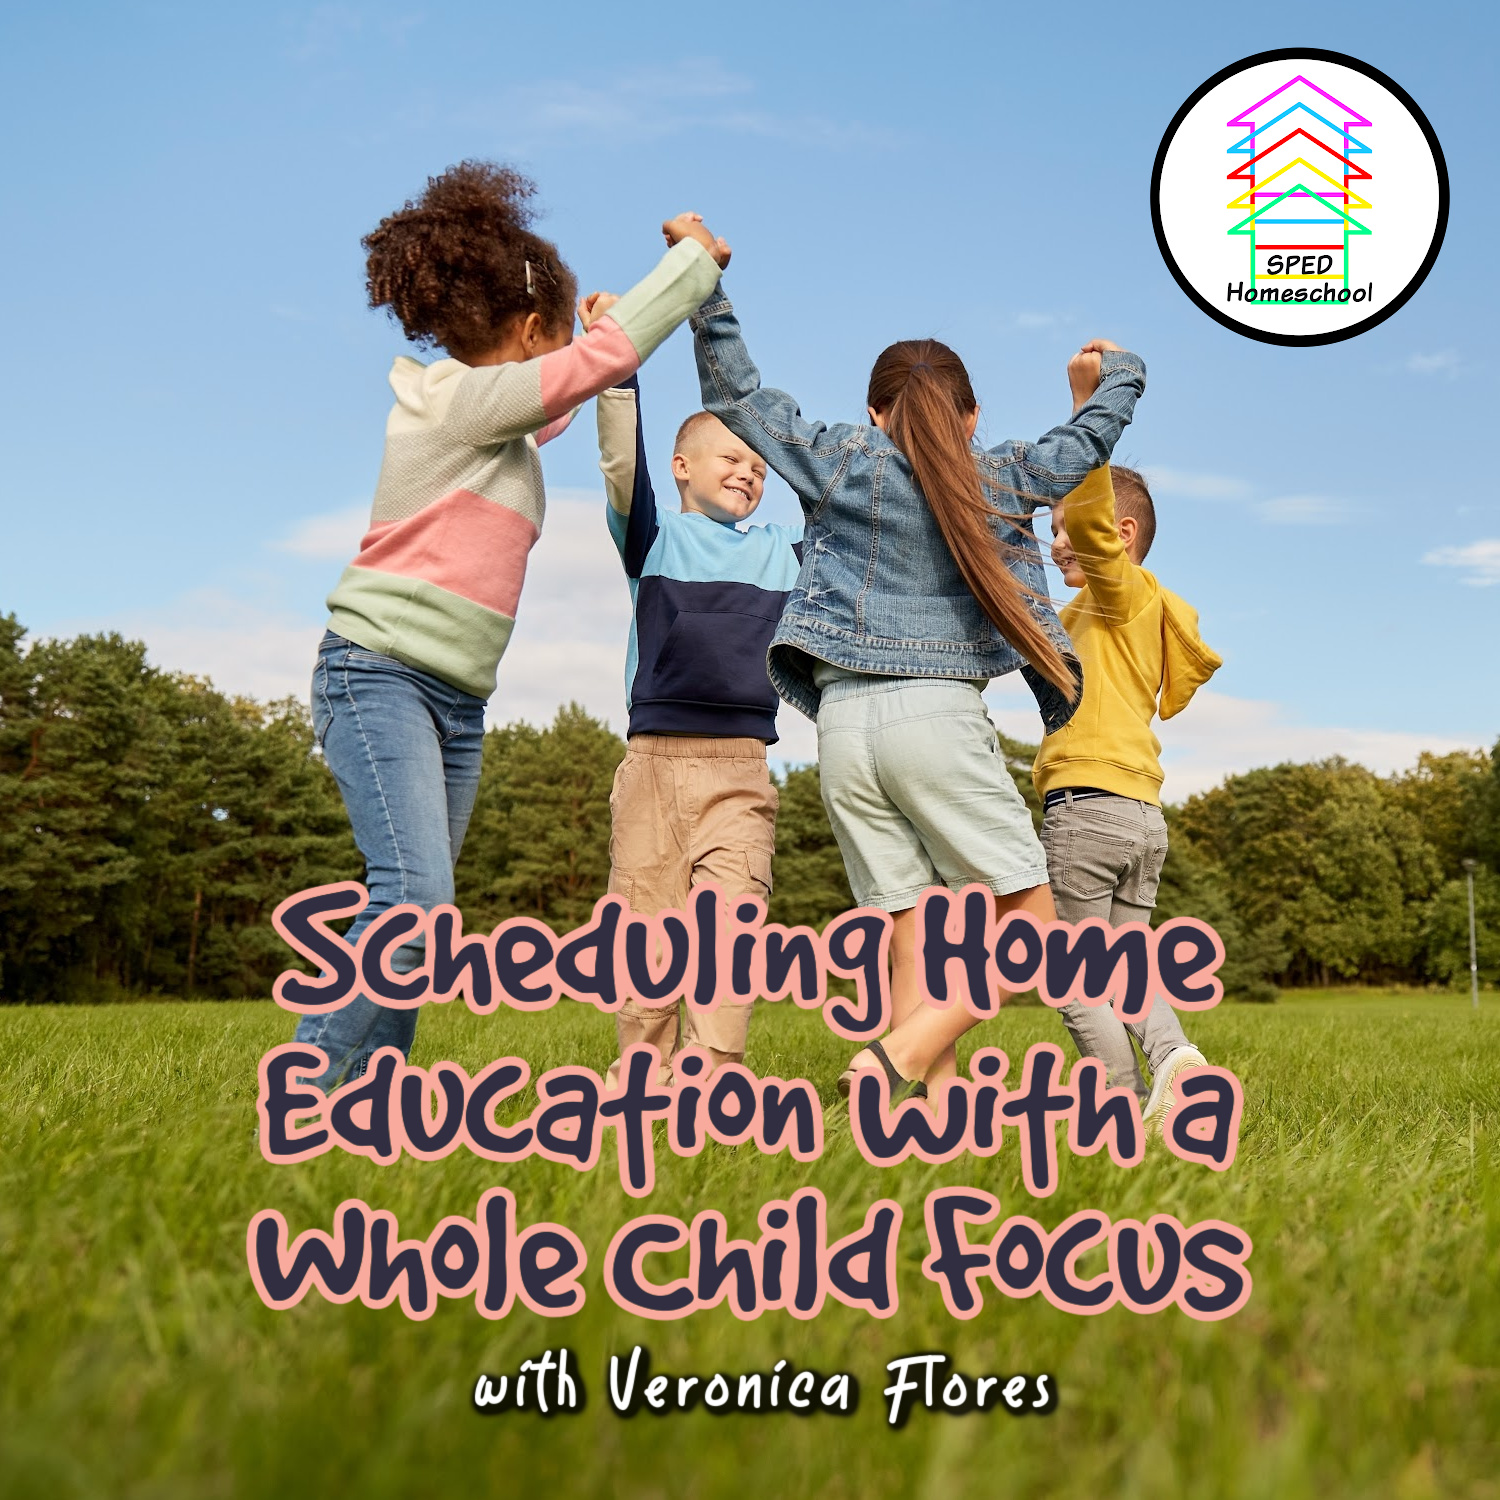 Scheduling Home Education with a Whole Child Focus